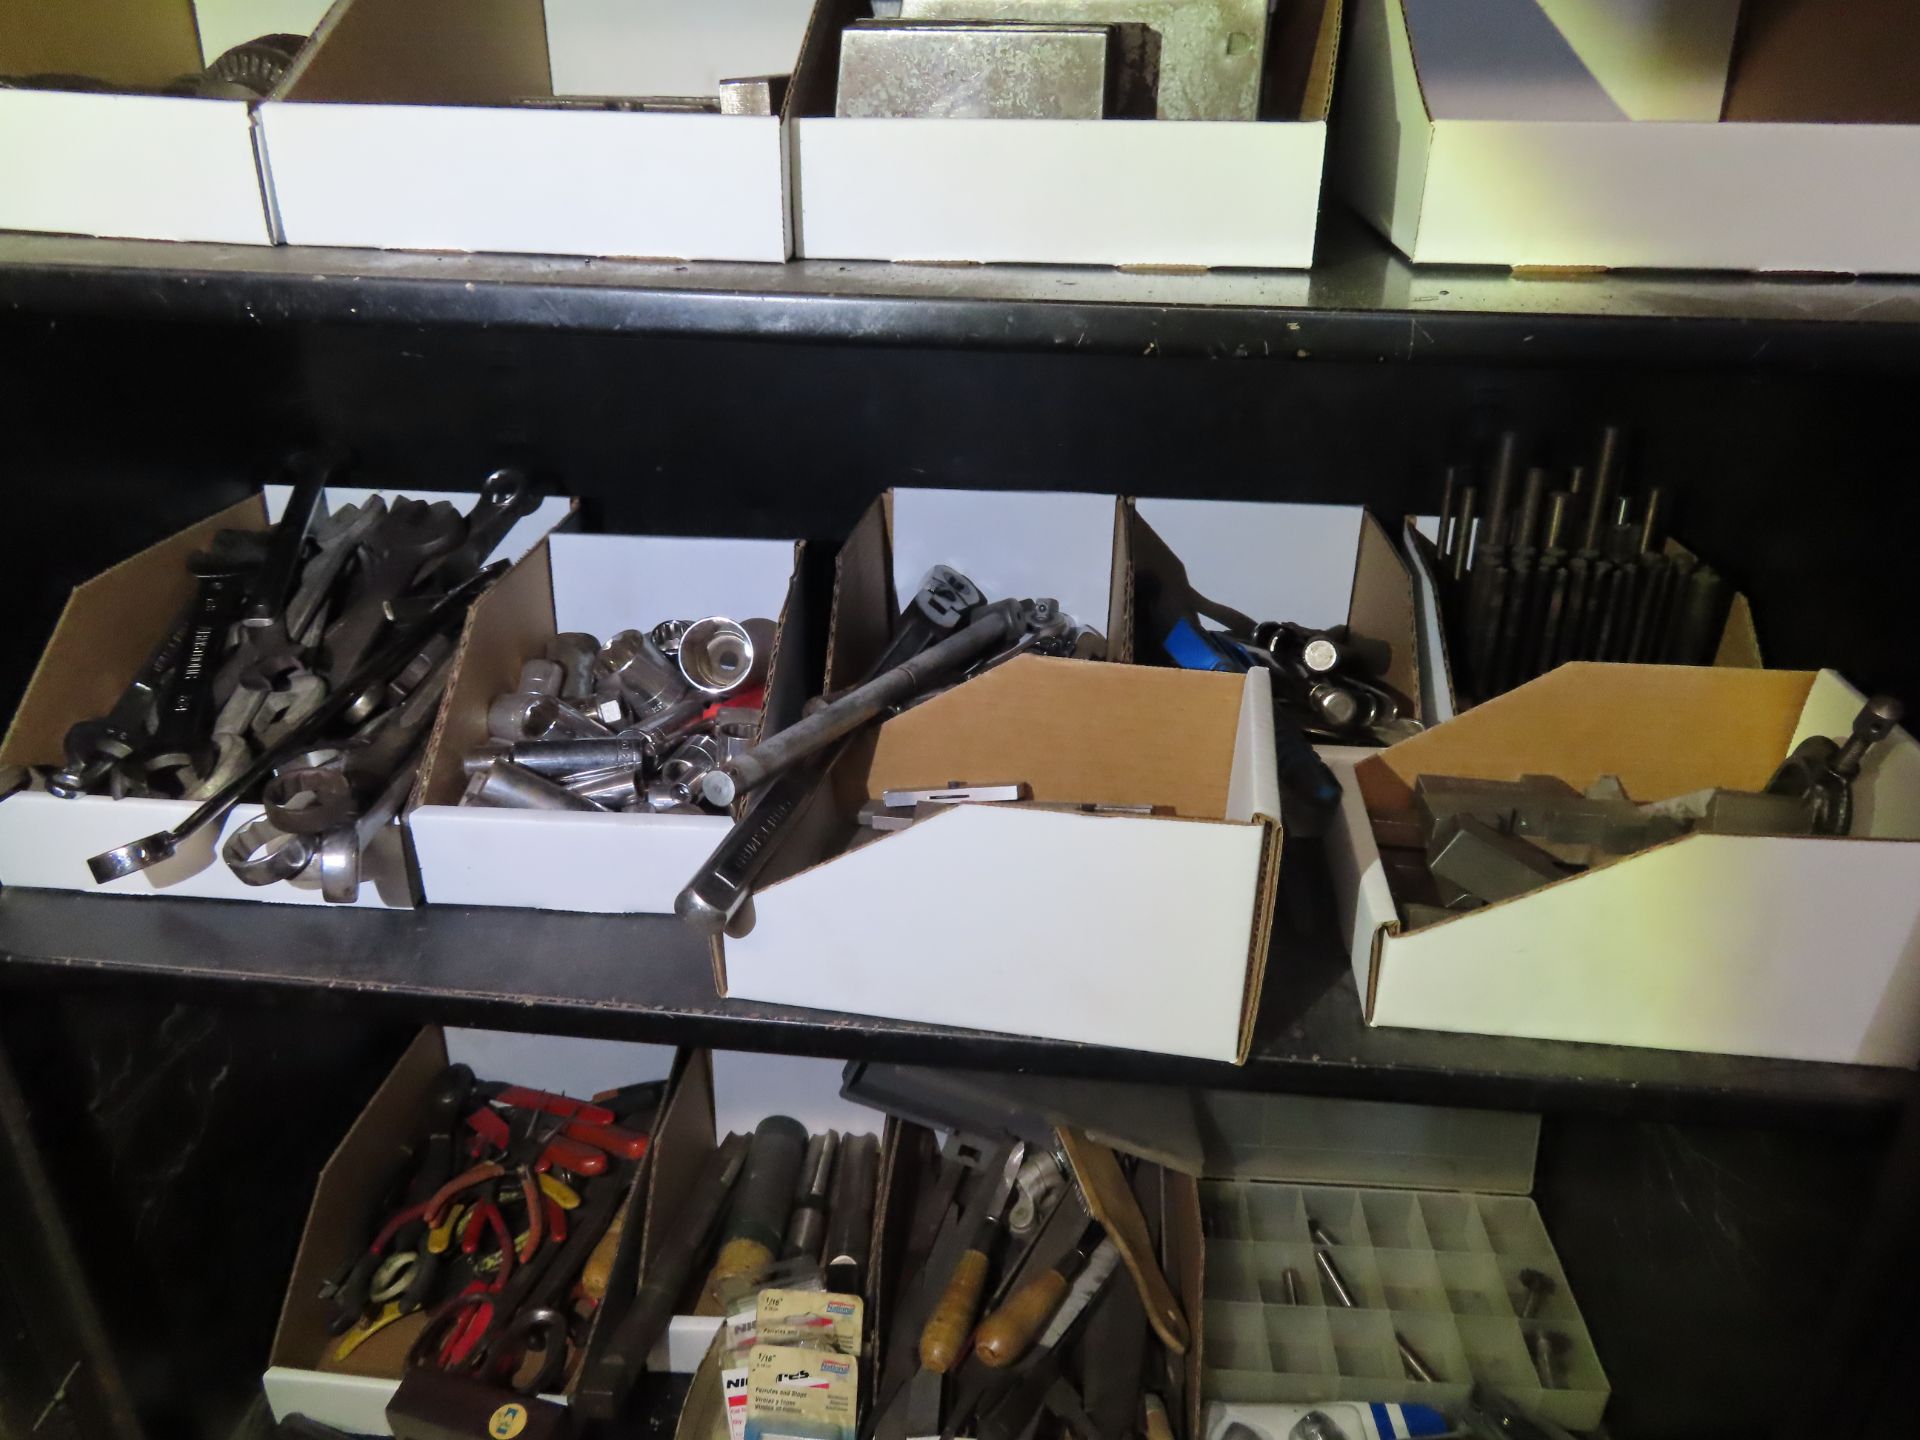 Metal Cabinet and Tooling Contents, Collets, Wrenches, Files, Drill Sets, Chucks, &d Other Tooling - Image 6 of 7